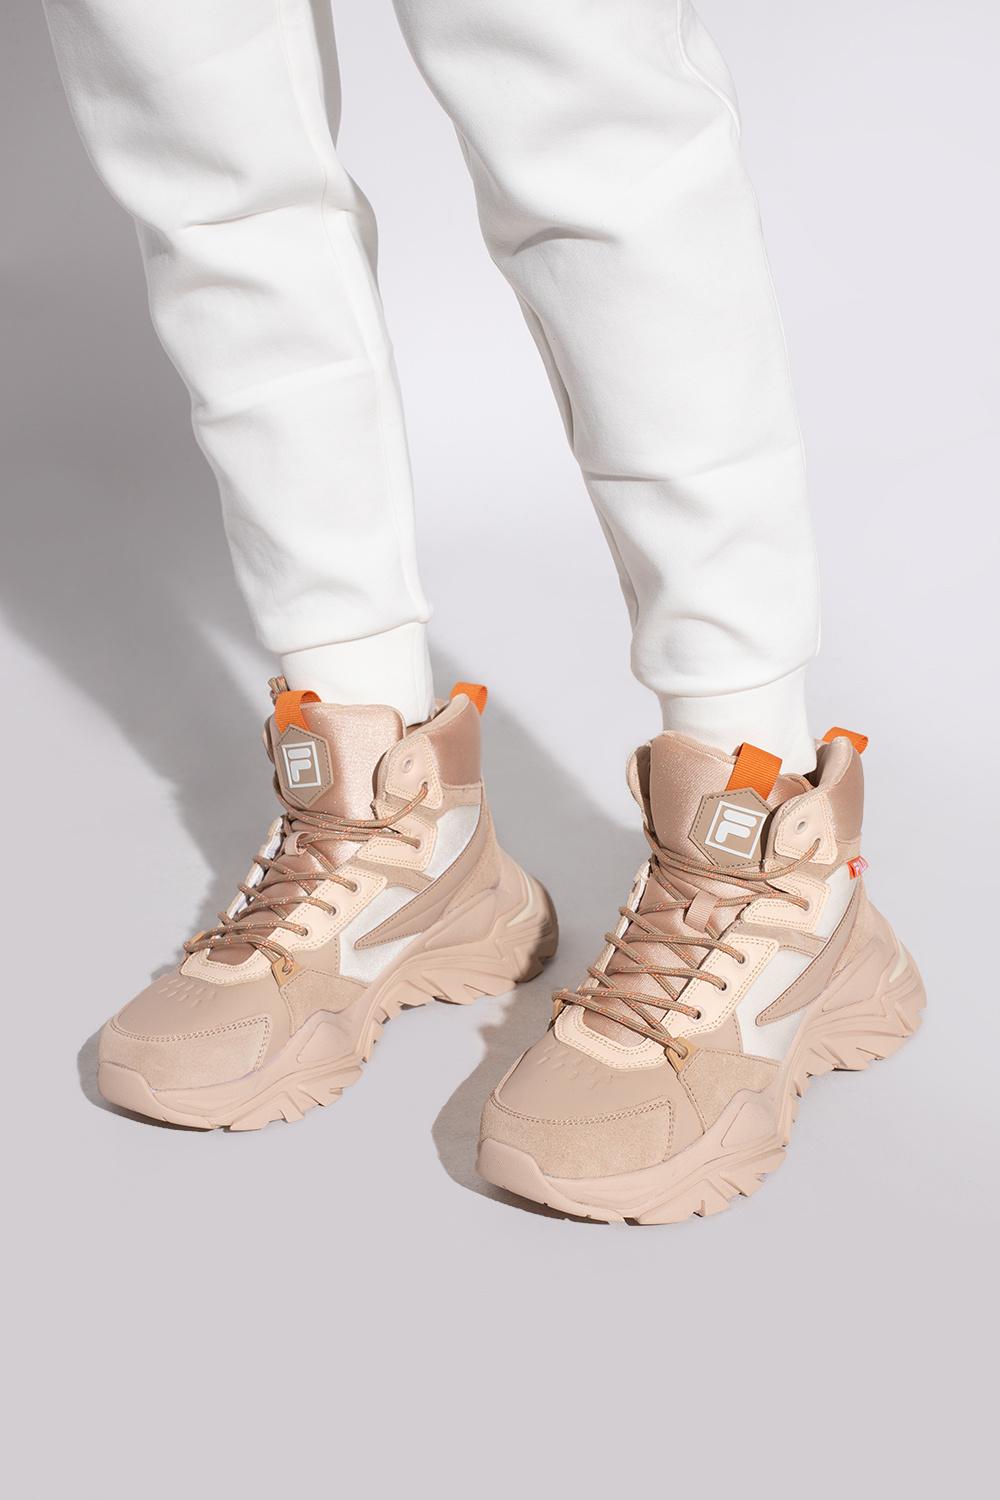 Fila 'electrove' High-top Sneakers in Natural | Lyst